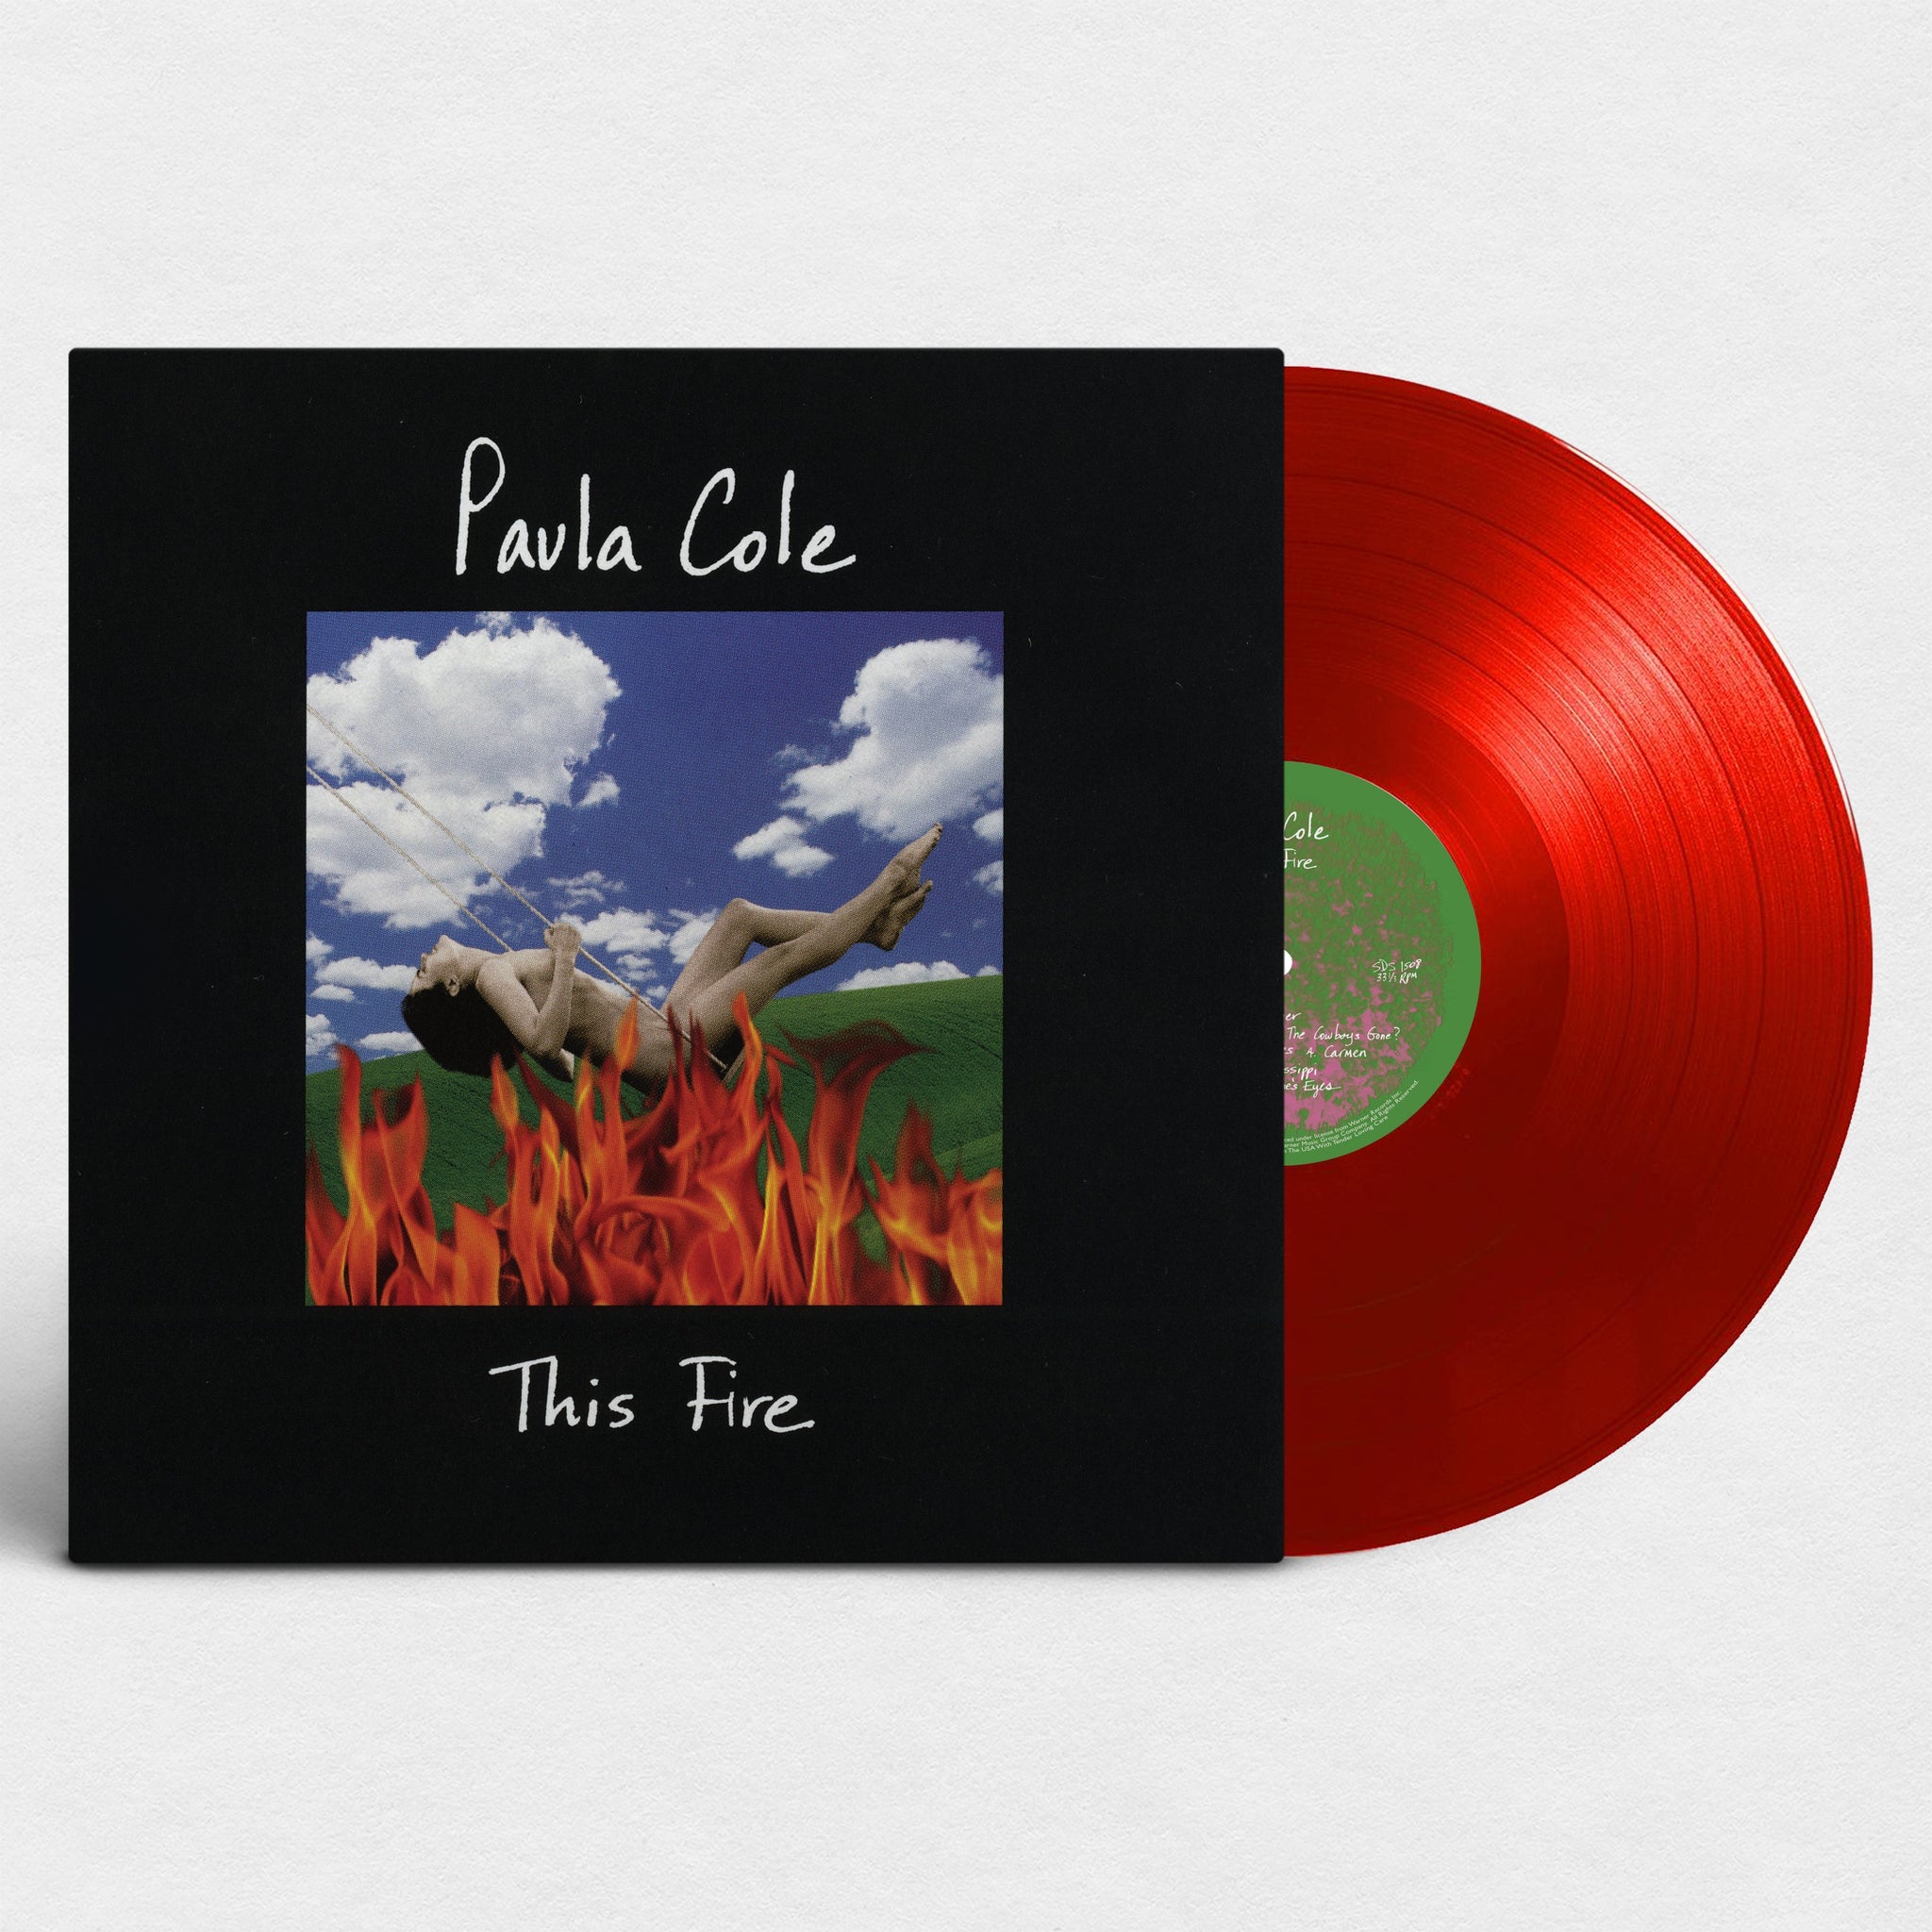 Paula Cole "This Fire" - Online Exclusive Translucent Red Vinyl  Now Shipping